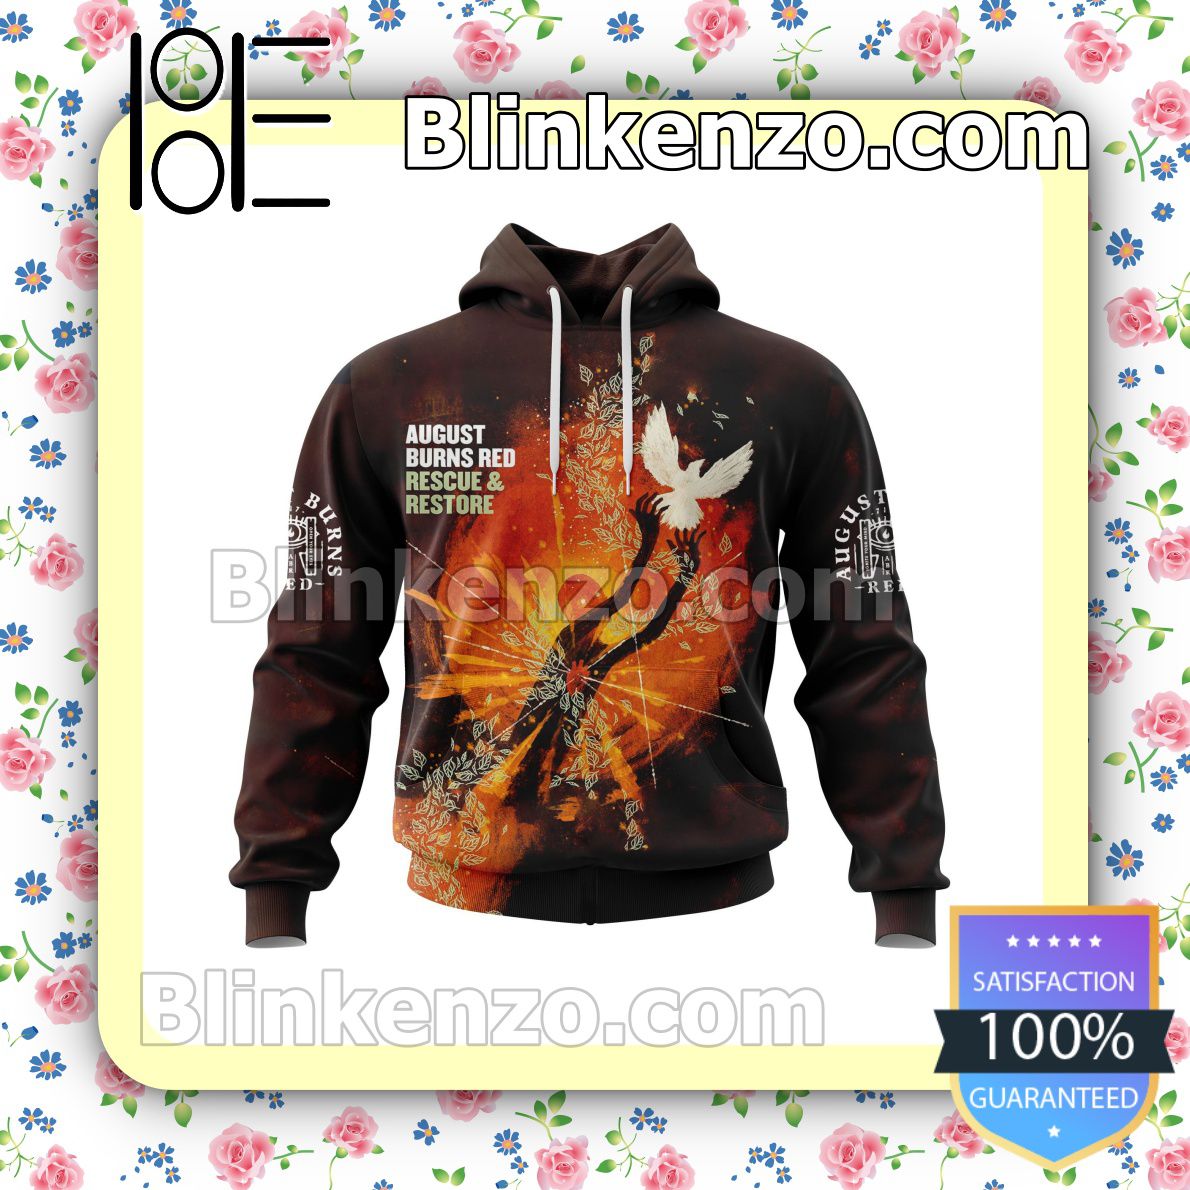 Personalized August Burns Red Rescue And Restore Album Cover Hooded Sweatshirt